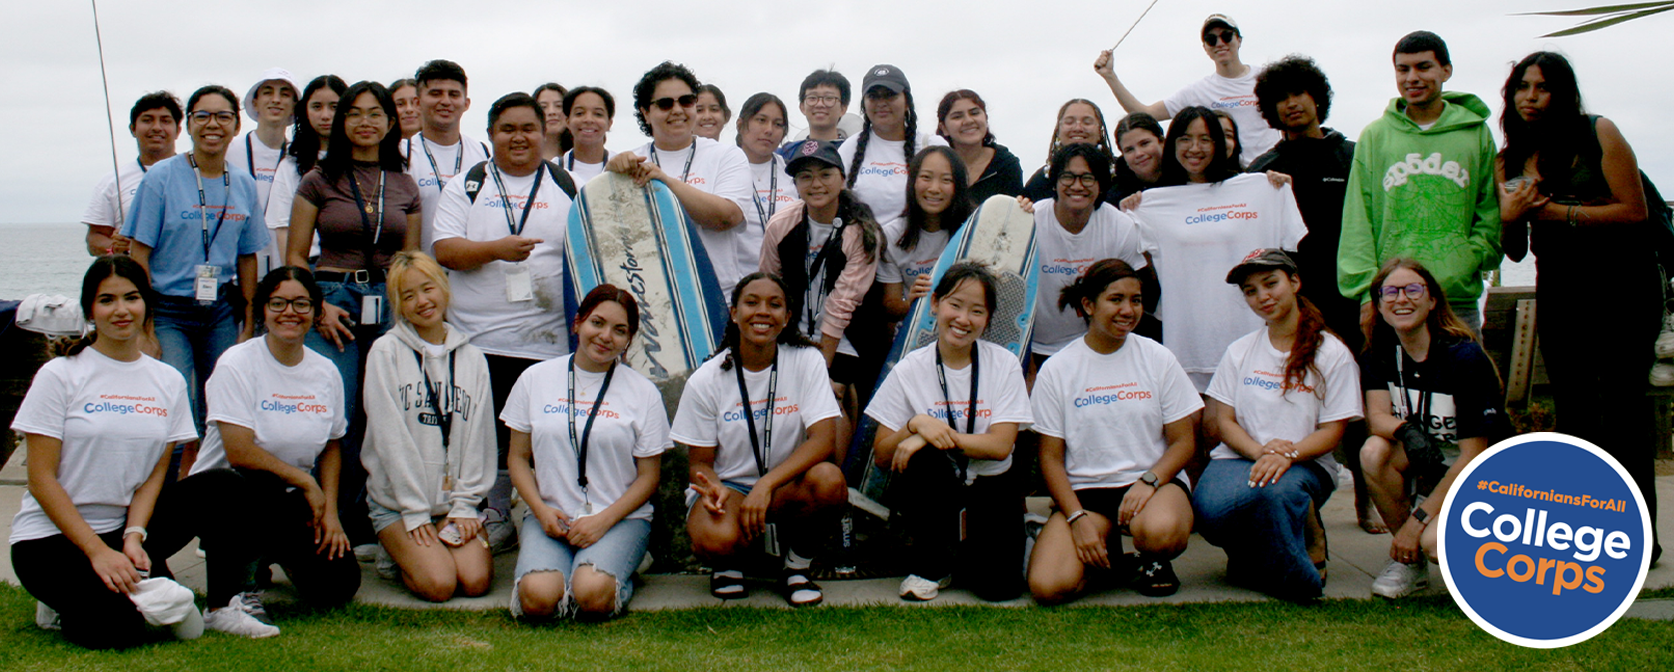 Group photo of College Corps Fellows after a day of service beach clean up